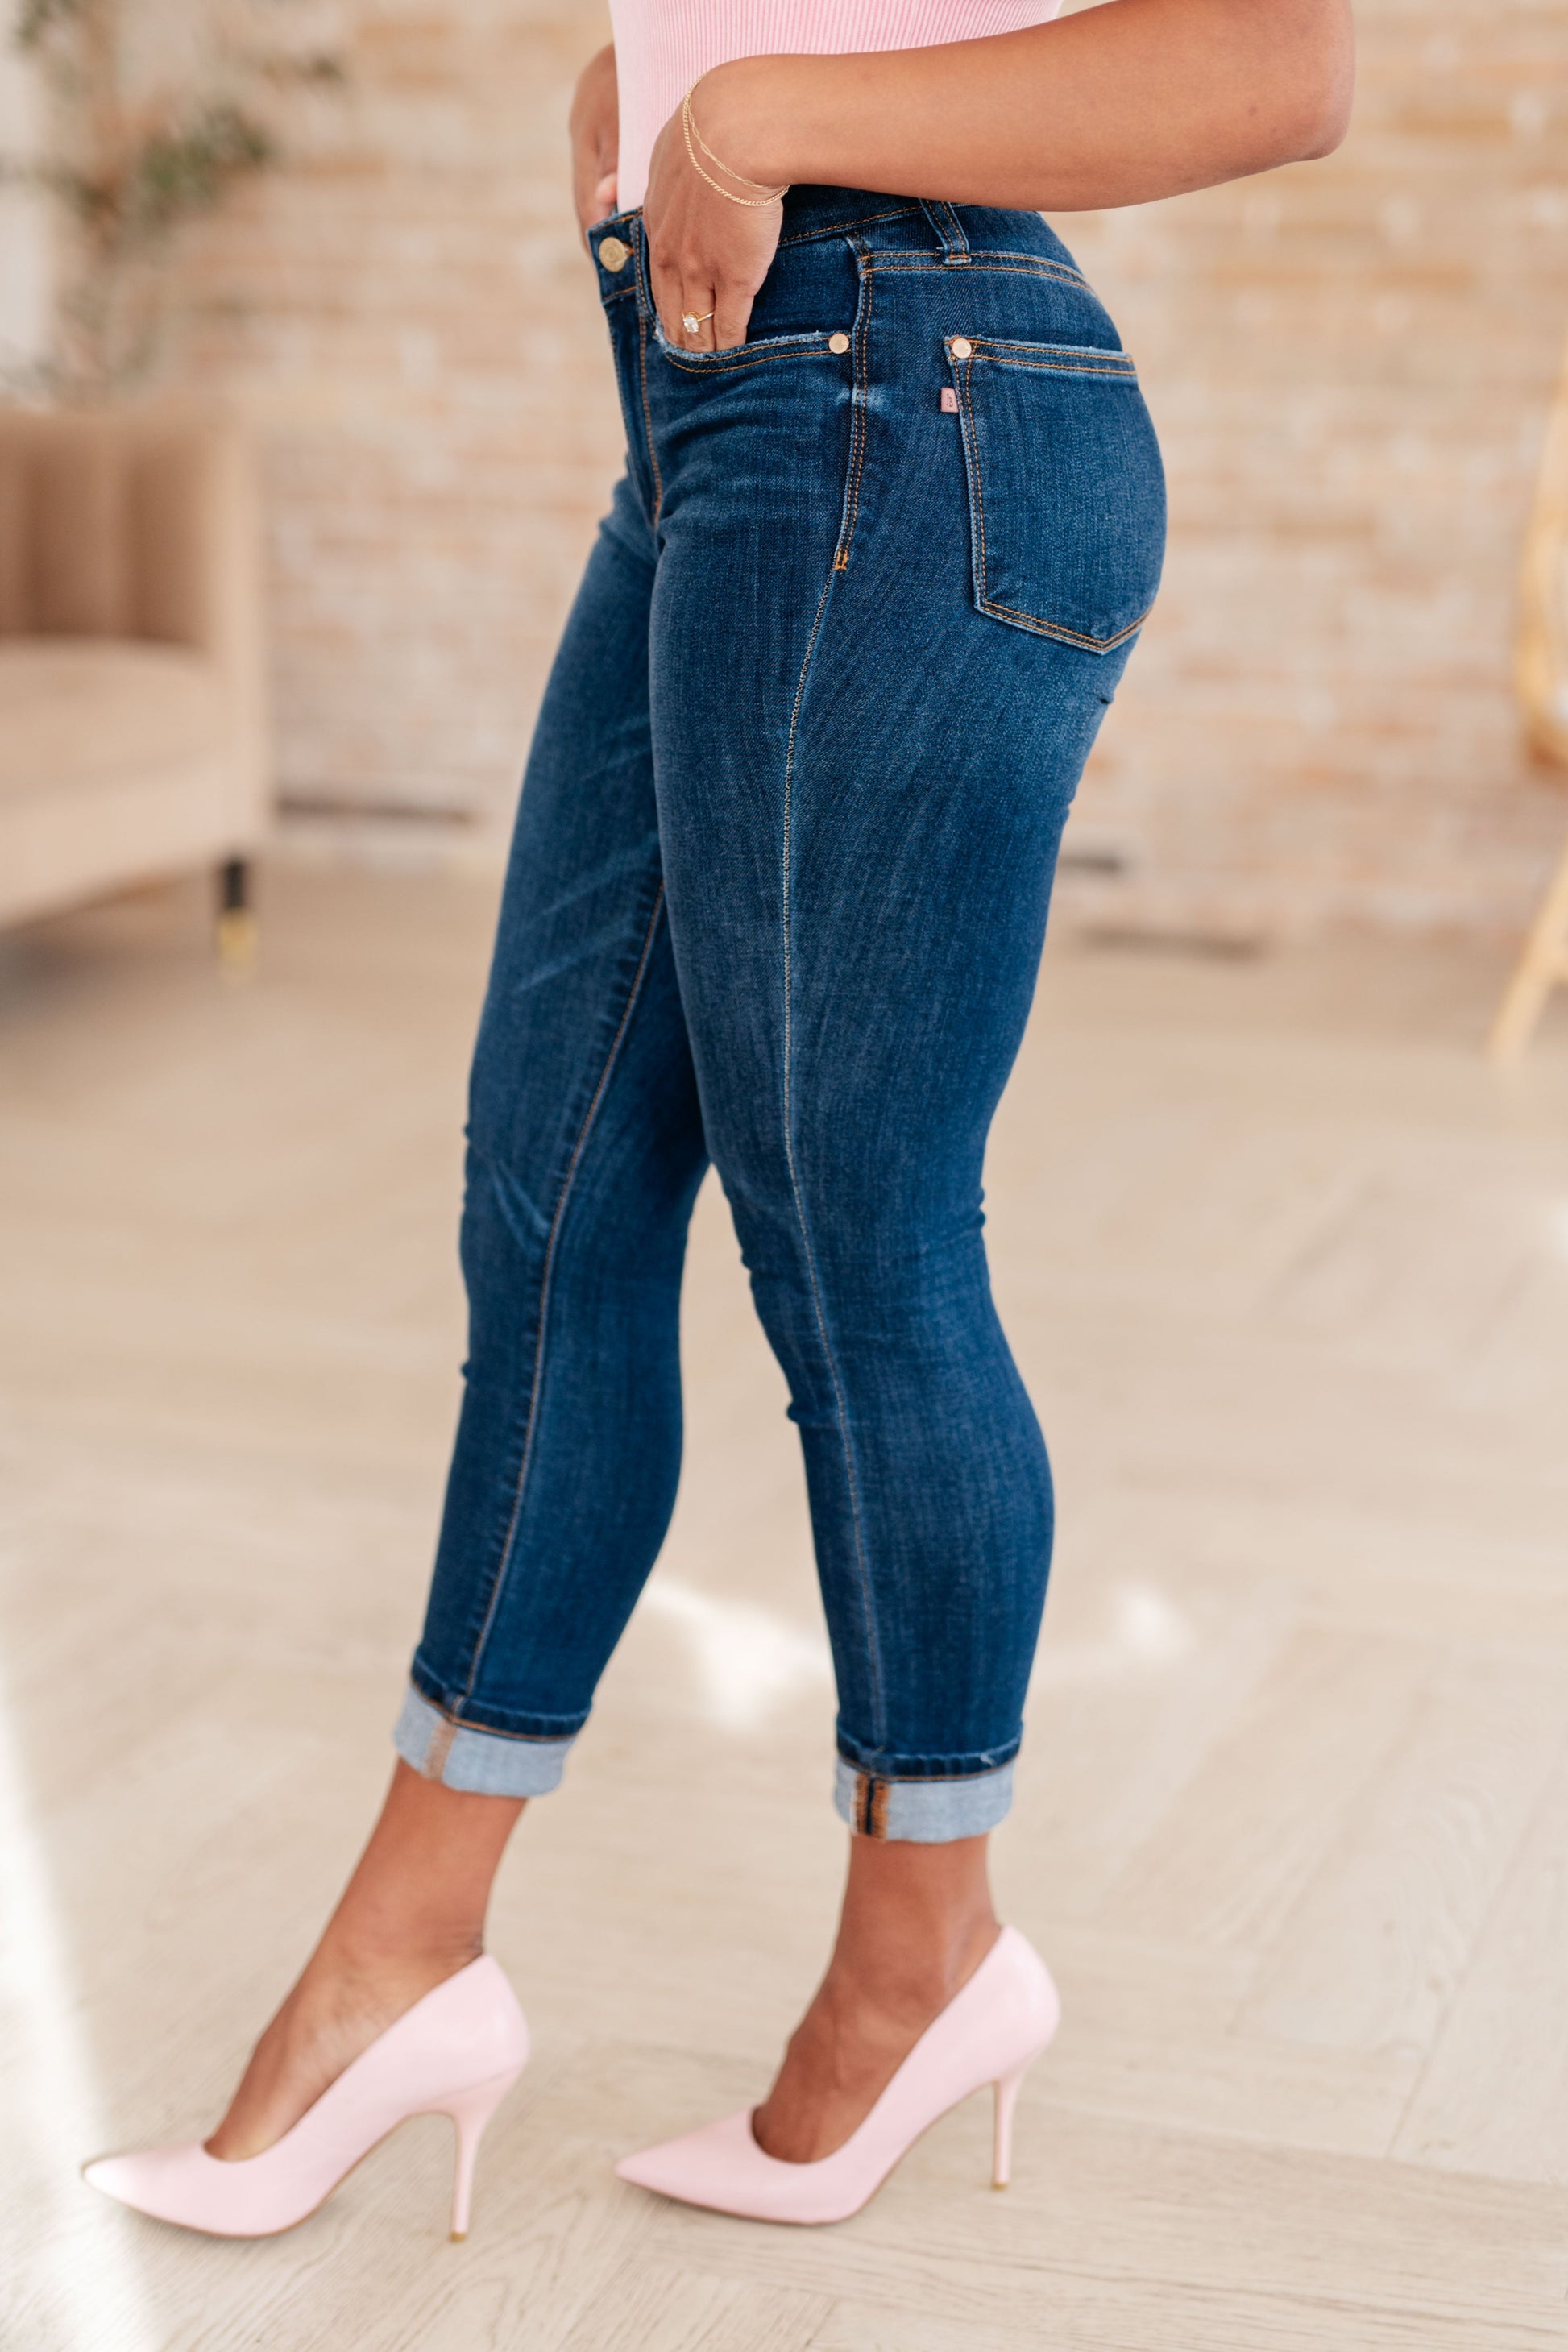 Upgrade your denim game with our Bette Mid Rise Vintage Cuffed Skinny Capri from Judy Blue! Enjoy the comfort of 4-way stretch and the timeless look of the dark vintage wash. Optional cuffed hems add a touch of style to this non-distressed, mid-rise jean. Perfect for a modern twist on a classic favorite. 0 -24W